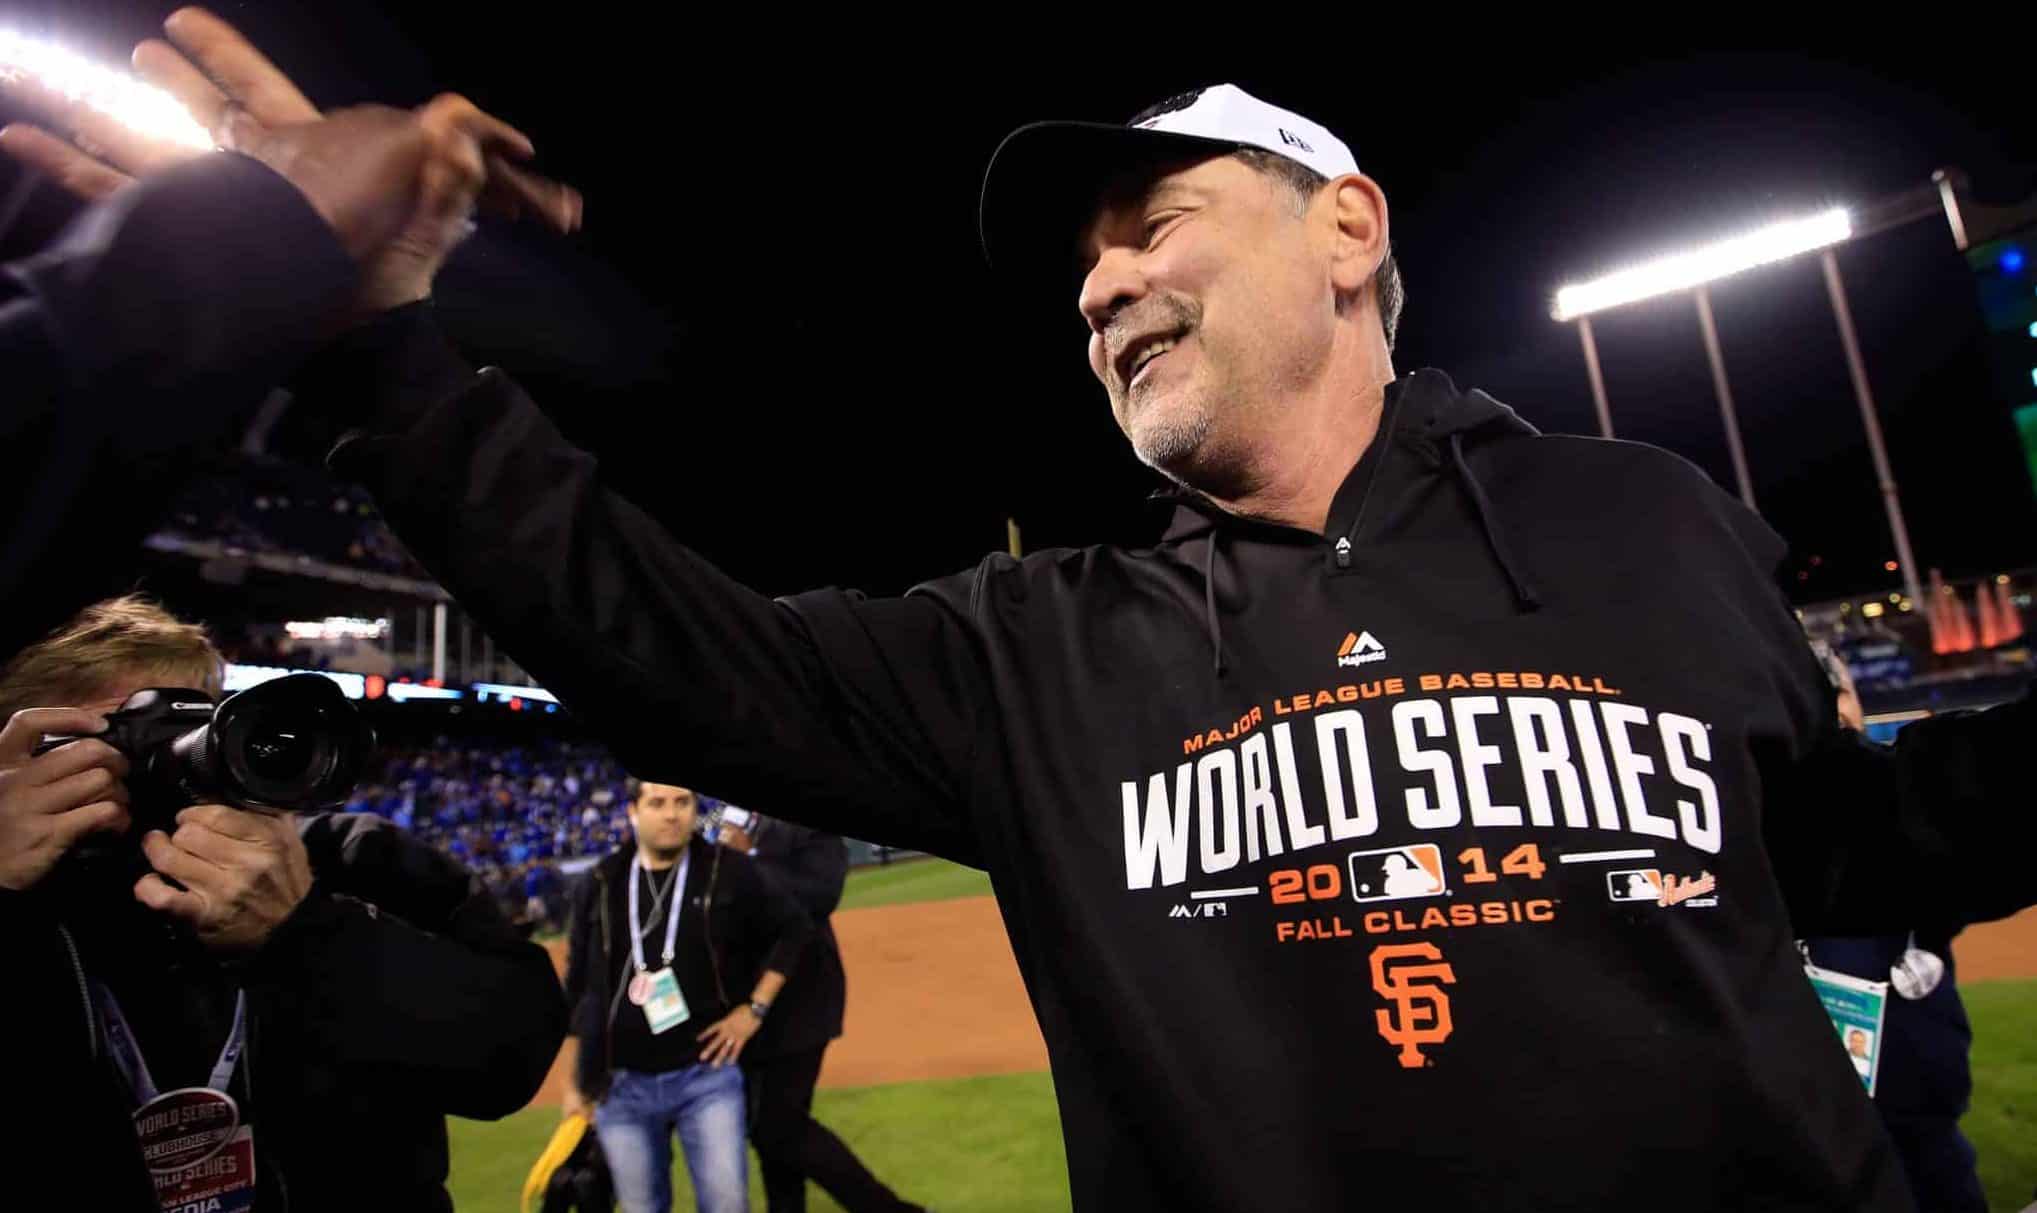 KANSAS CITY, MO - OCTOBER 29: Manager Bruce Bochy #15 of the San Francisco Giants celebrates on the field after defeating the Kansas City Royals 3-2 to win Game Seven of the 2014 World Series at Kauffman Stadium on October 29, 2014 in Kansas City, Missouri.